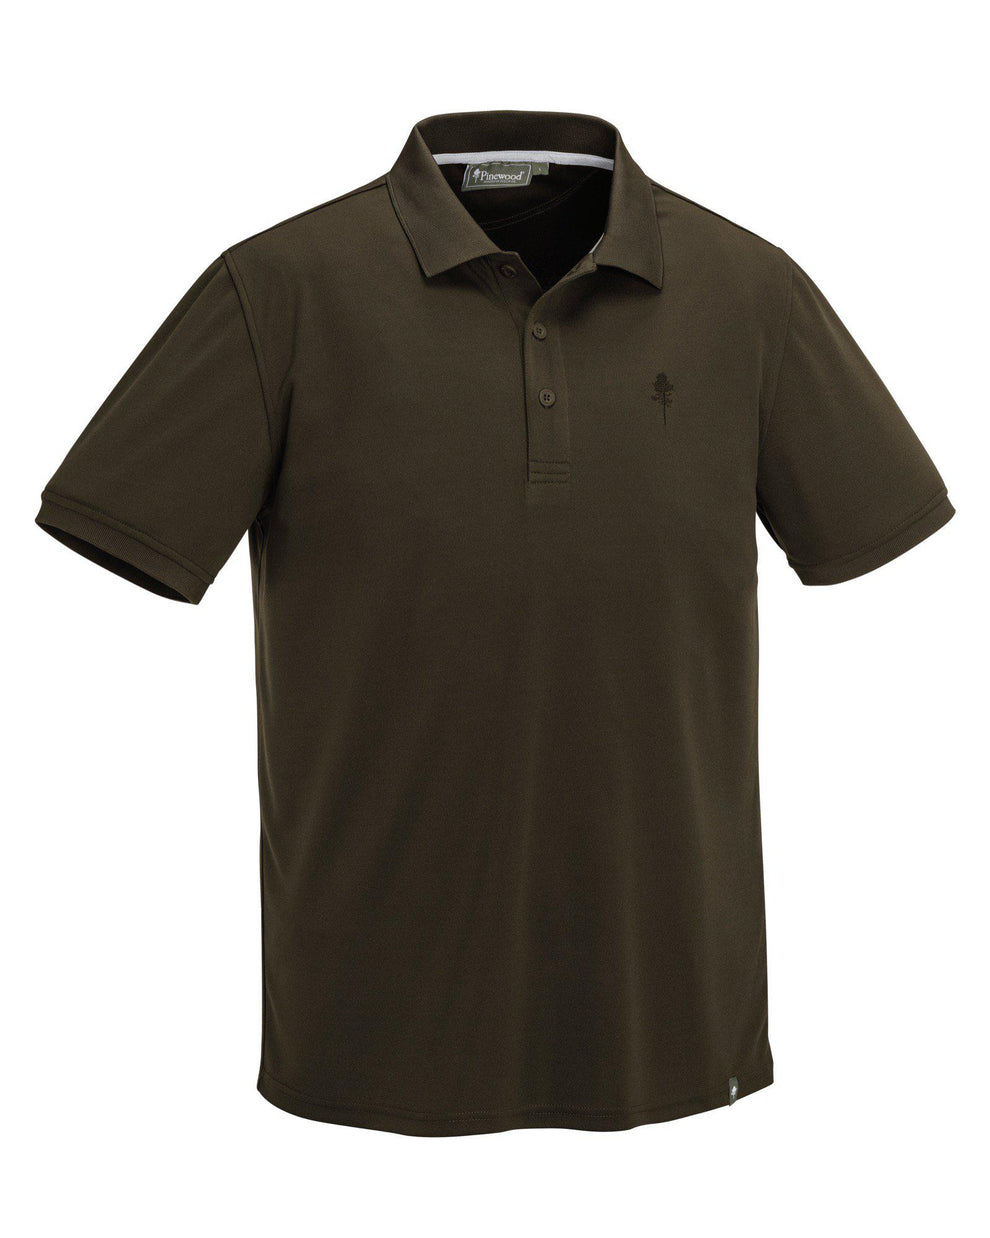 9458-241-01_Pinewood-Polo-Shirt-Ramsey-Coolmax_Suede-Brown